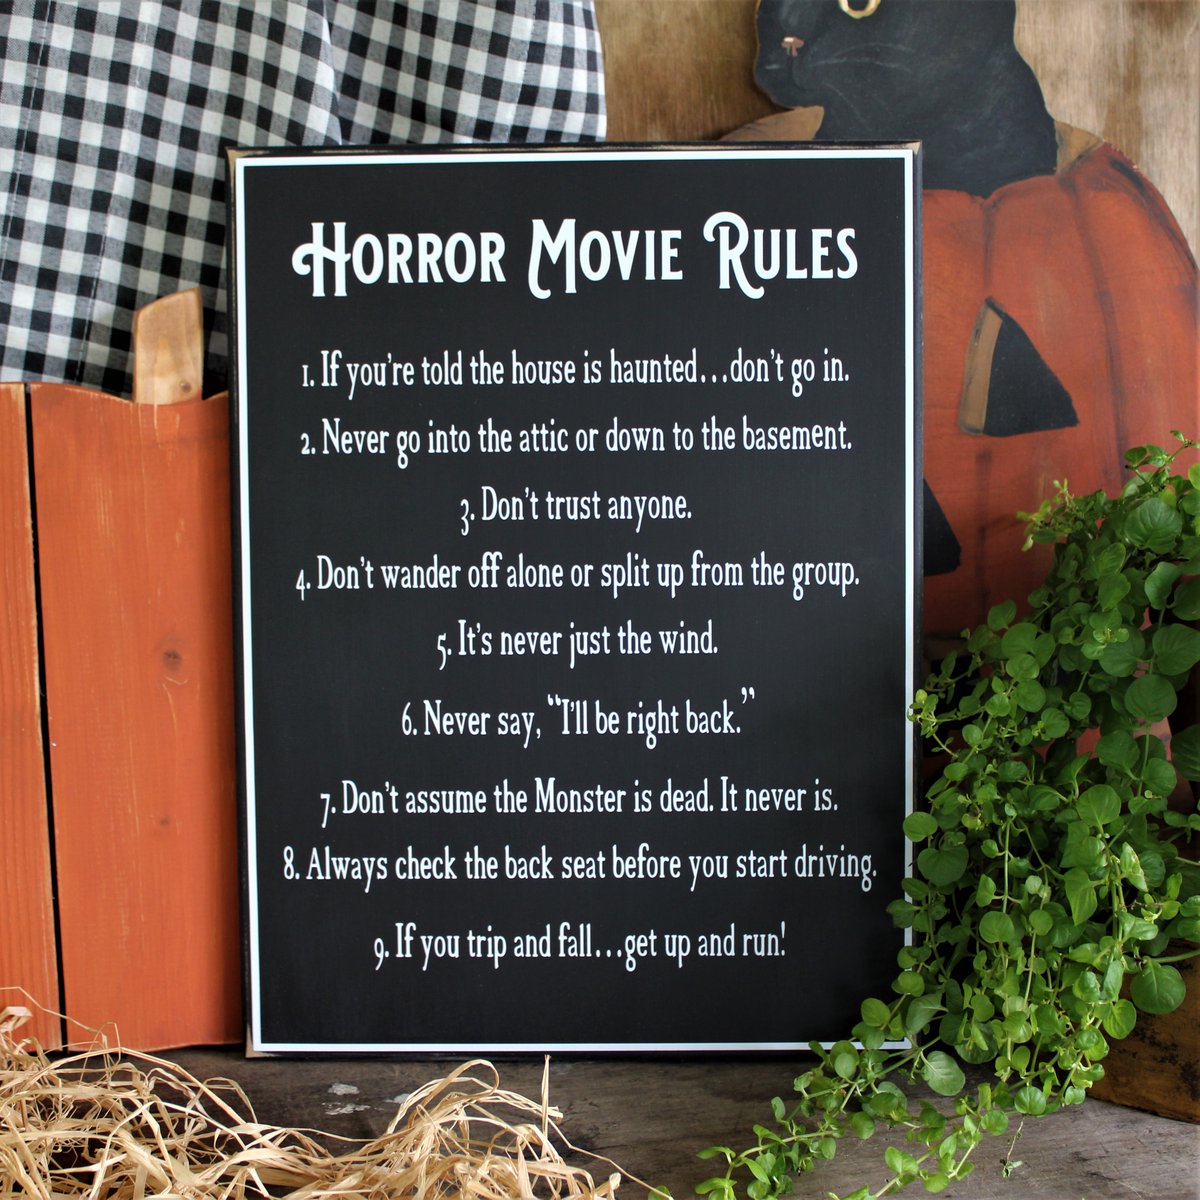 Horror Movie Rules What to say to while watching a spooky movie  #HalloweenDecor #WatchhorrorMovies #moviebuff #spooky #signmaker #Ilovehorrormovies #marylandmaker #SMILEtt23 #cwsigns countryworkshop.net/products/horro…